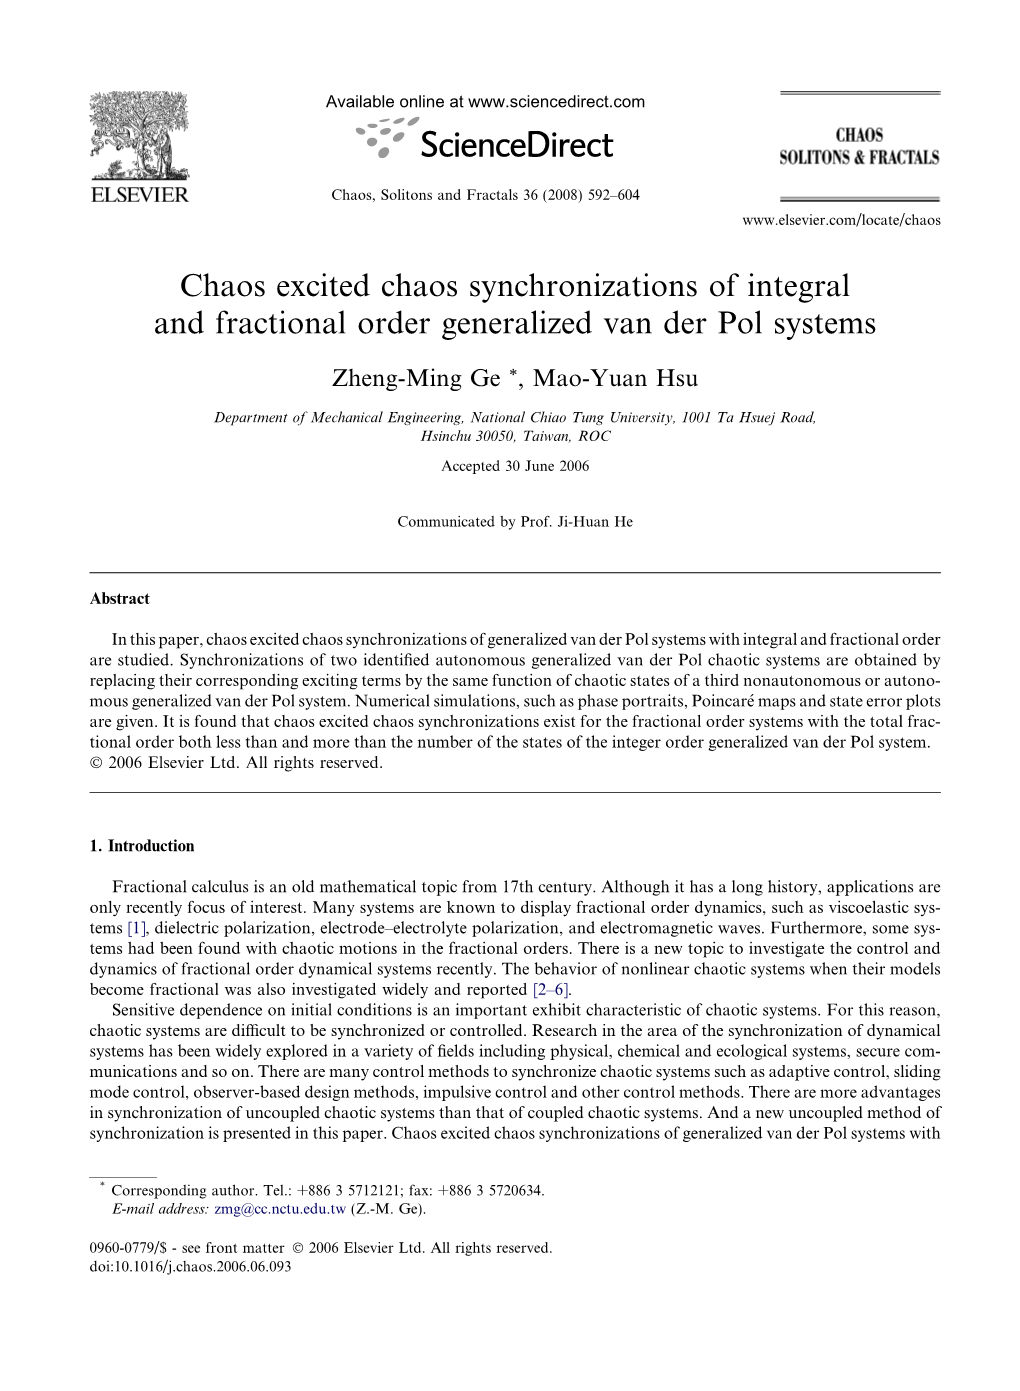 Chaos Excited Chaos Synchronizations of Integral and Fractional Order Generalized Van Der Pol Systems